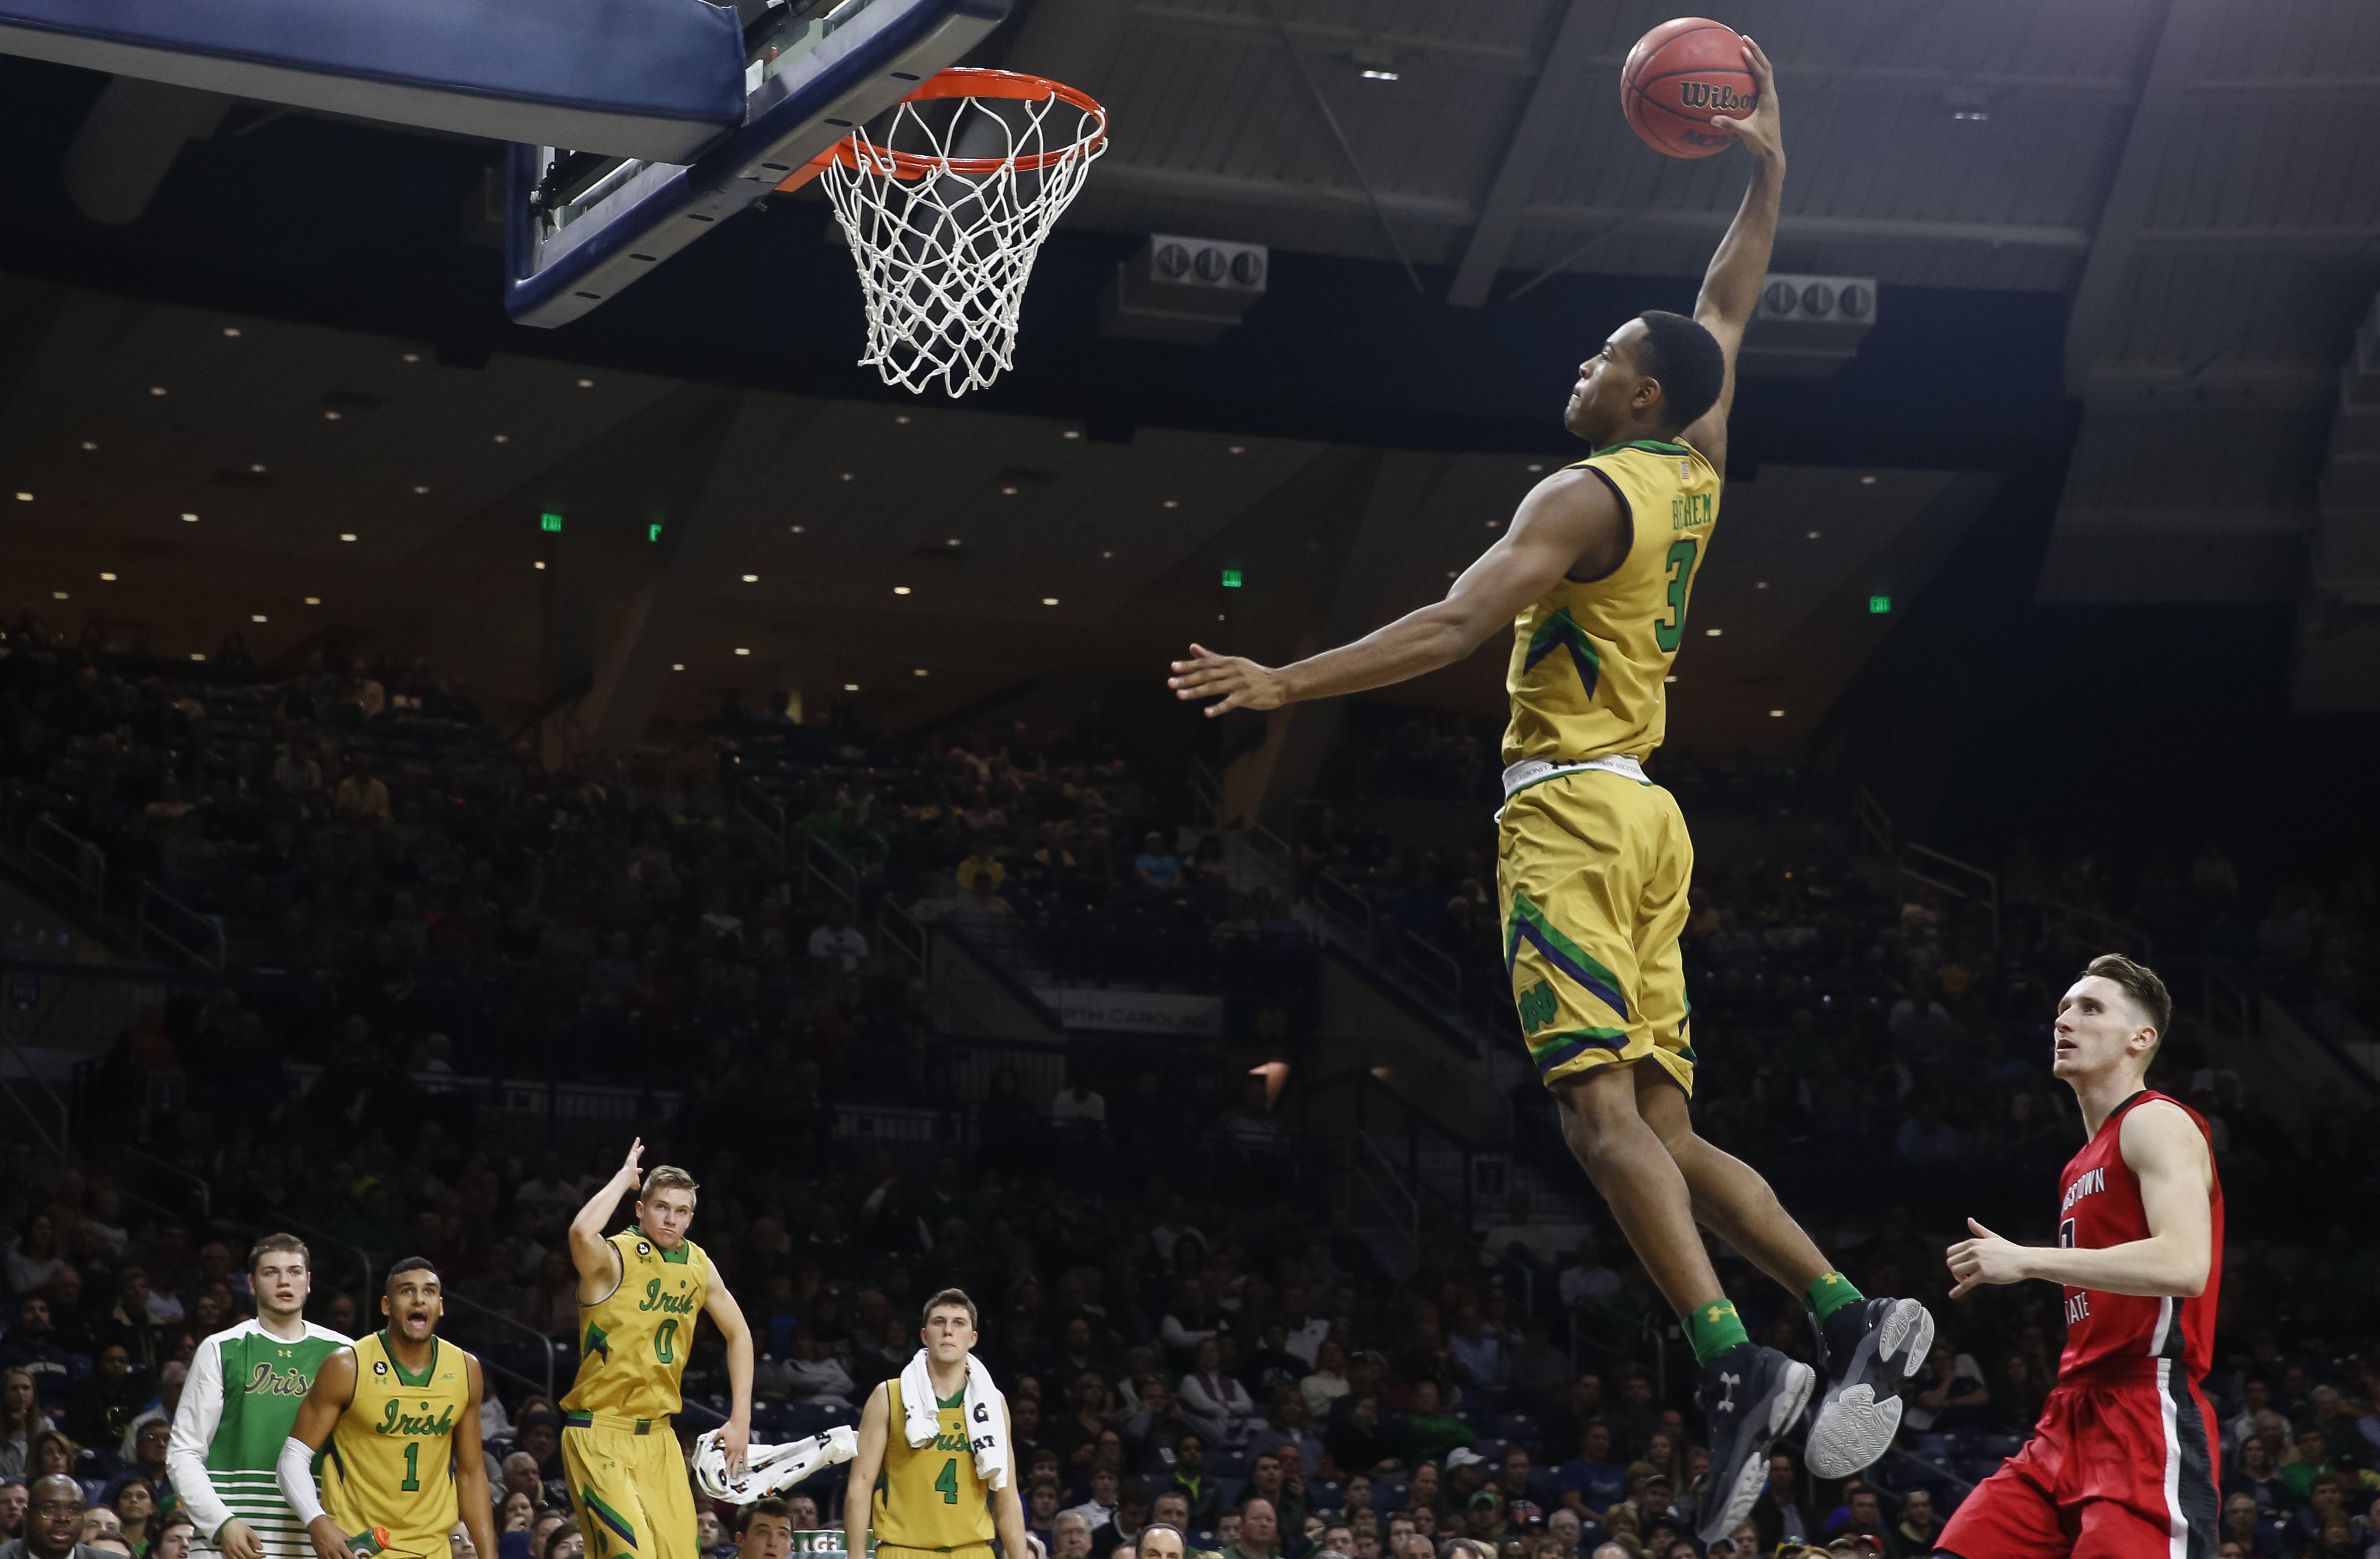 SOUTH BEND, IN - DECEMBER 21: V.J. Beachem #3 of the Notre Dame Fighting Irish jumps through the air for a dunk against the Youngstown State Penguins at Purcell Pavilion on December 21, 2015 in South Bend, Indiana. Notre Dame defeated Youngstown State 87-78. (Photo by Michael Hickey/Getty Images)